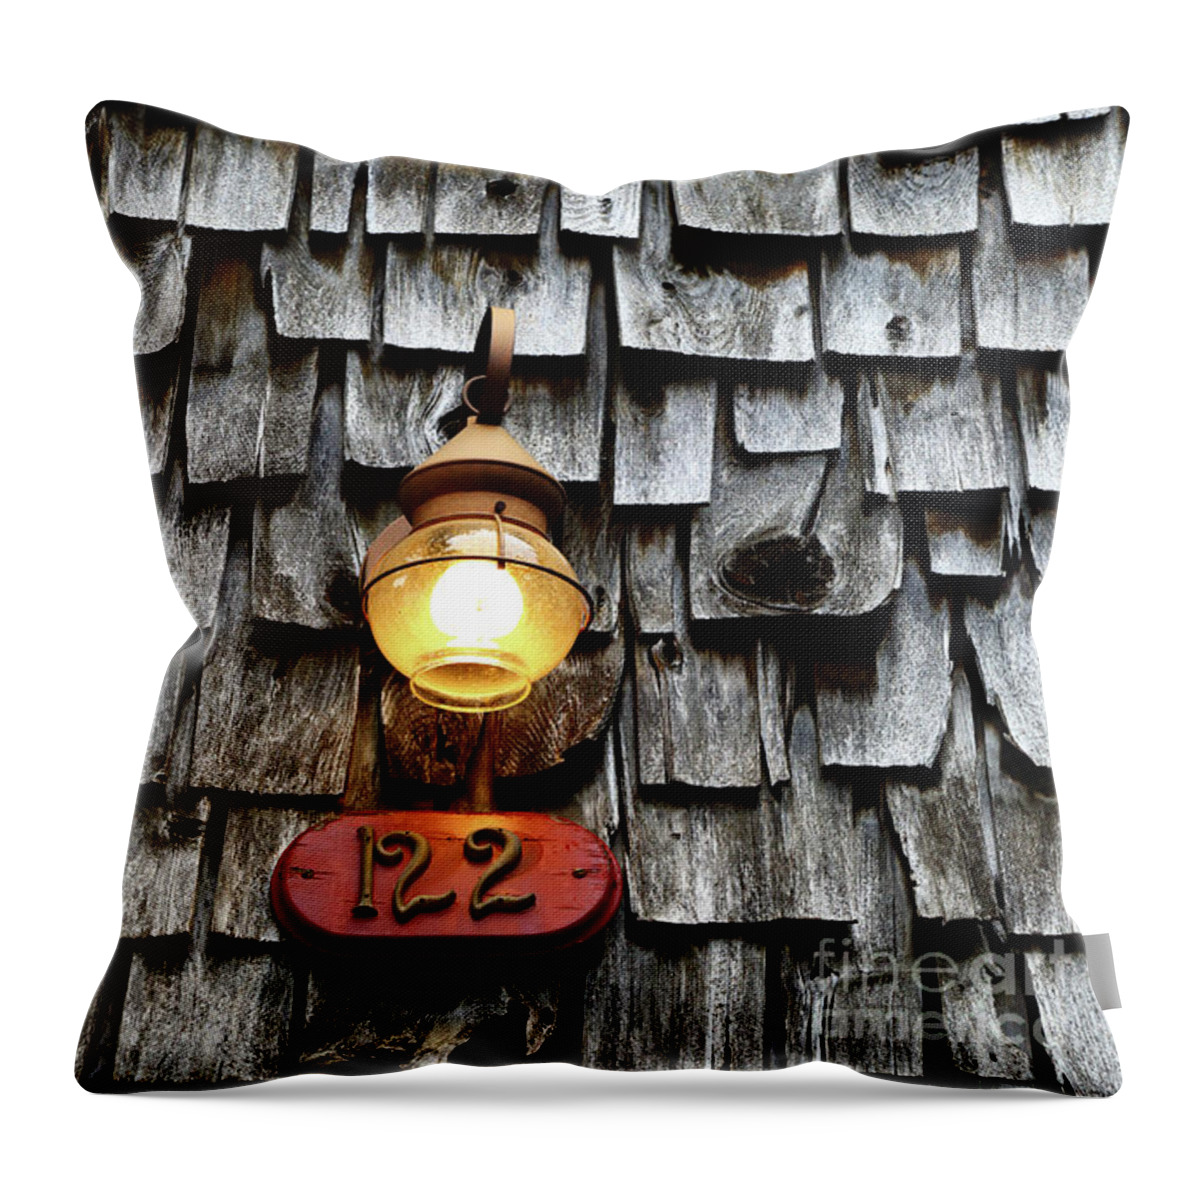 Lamp Throw Pillow featuring the photograph Antique Lamp and Wooden Tiles Frederick Maryland by James Brunker